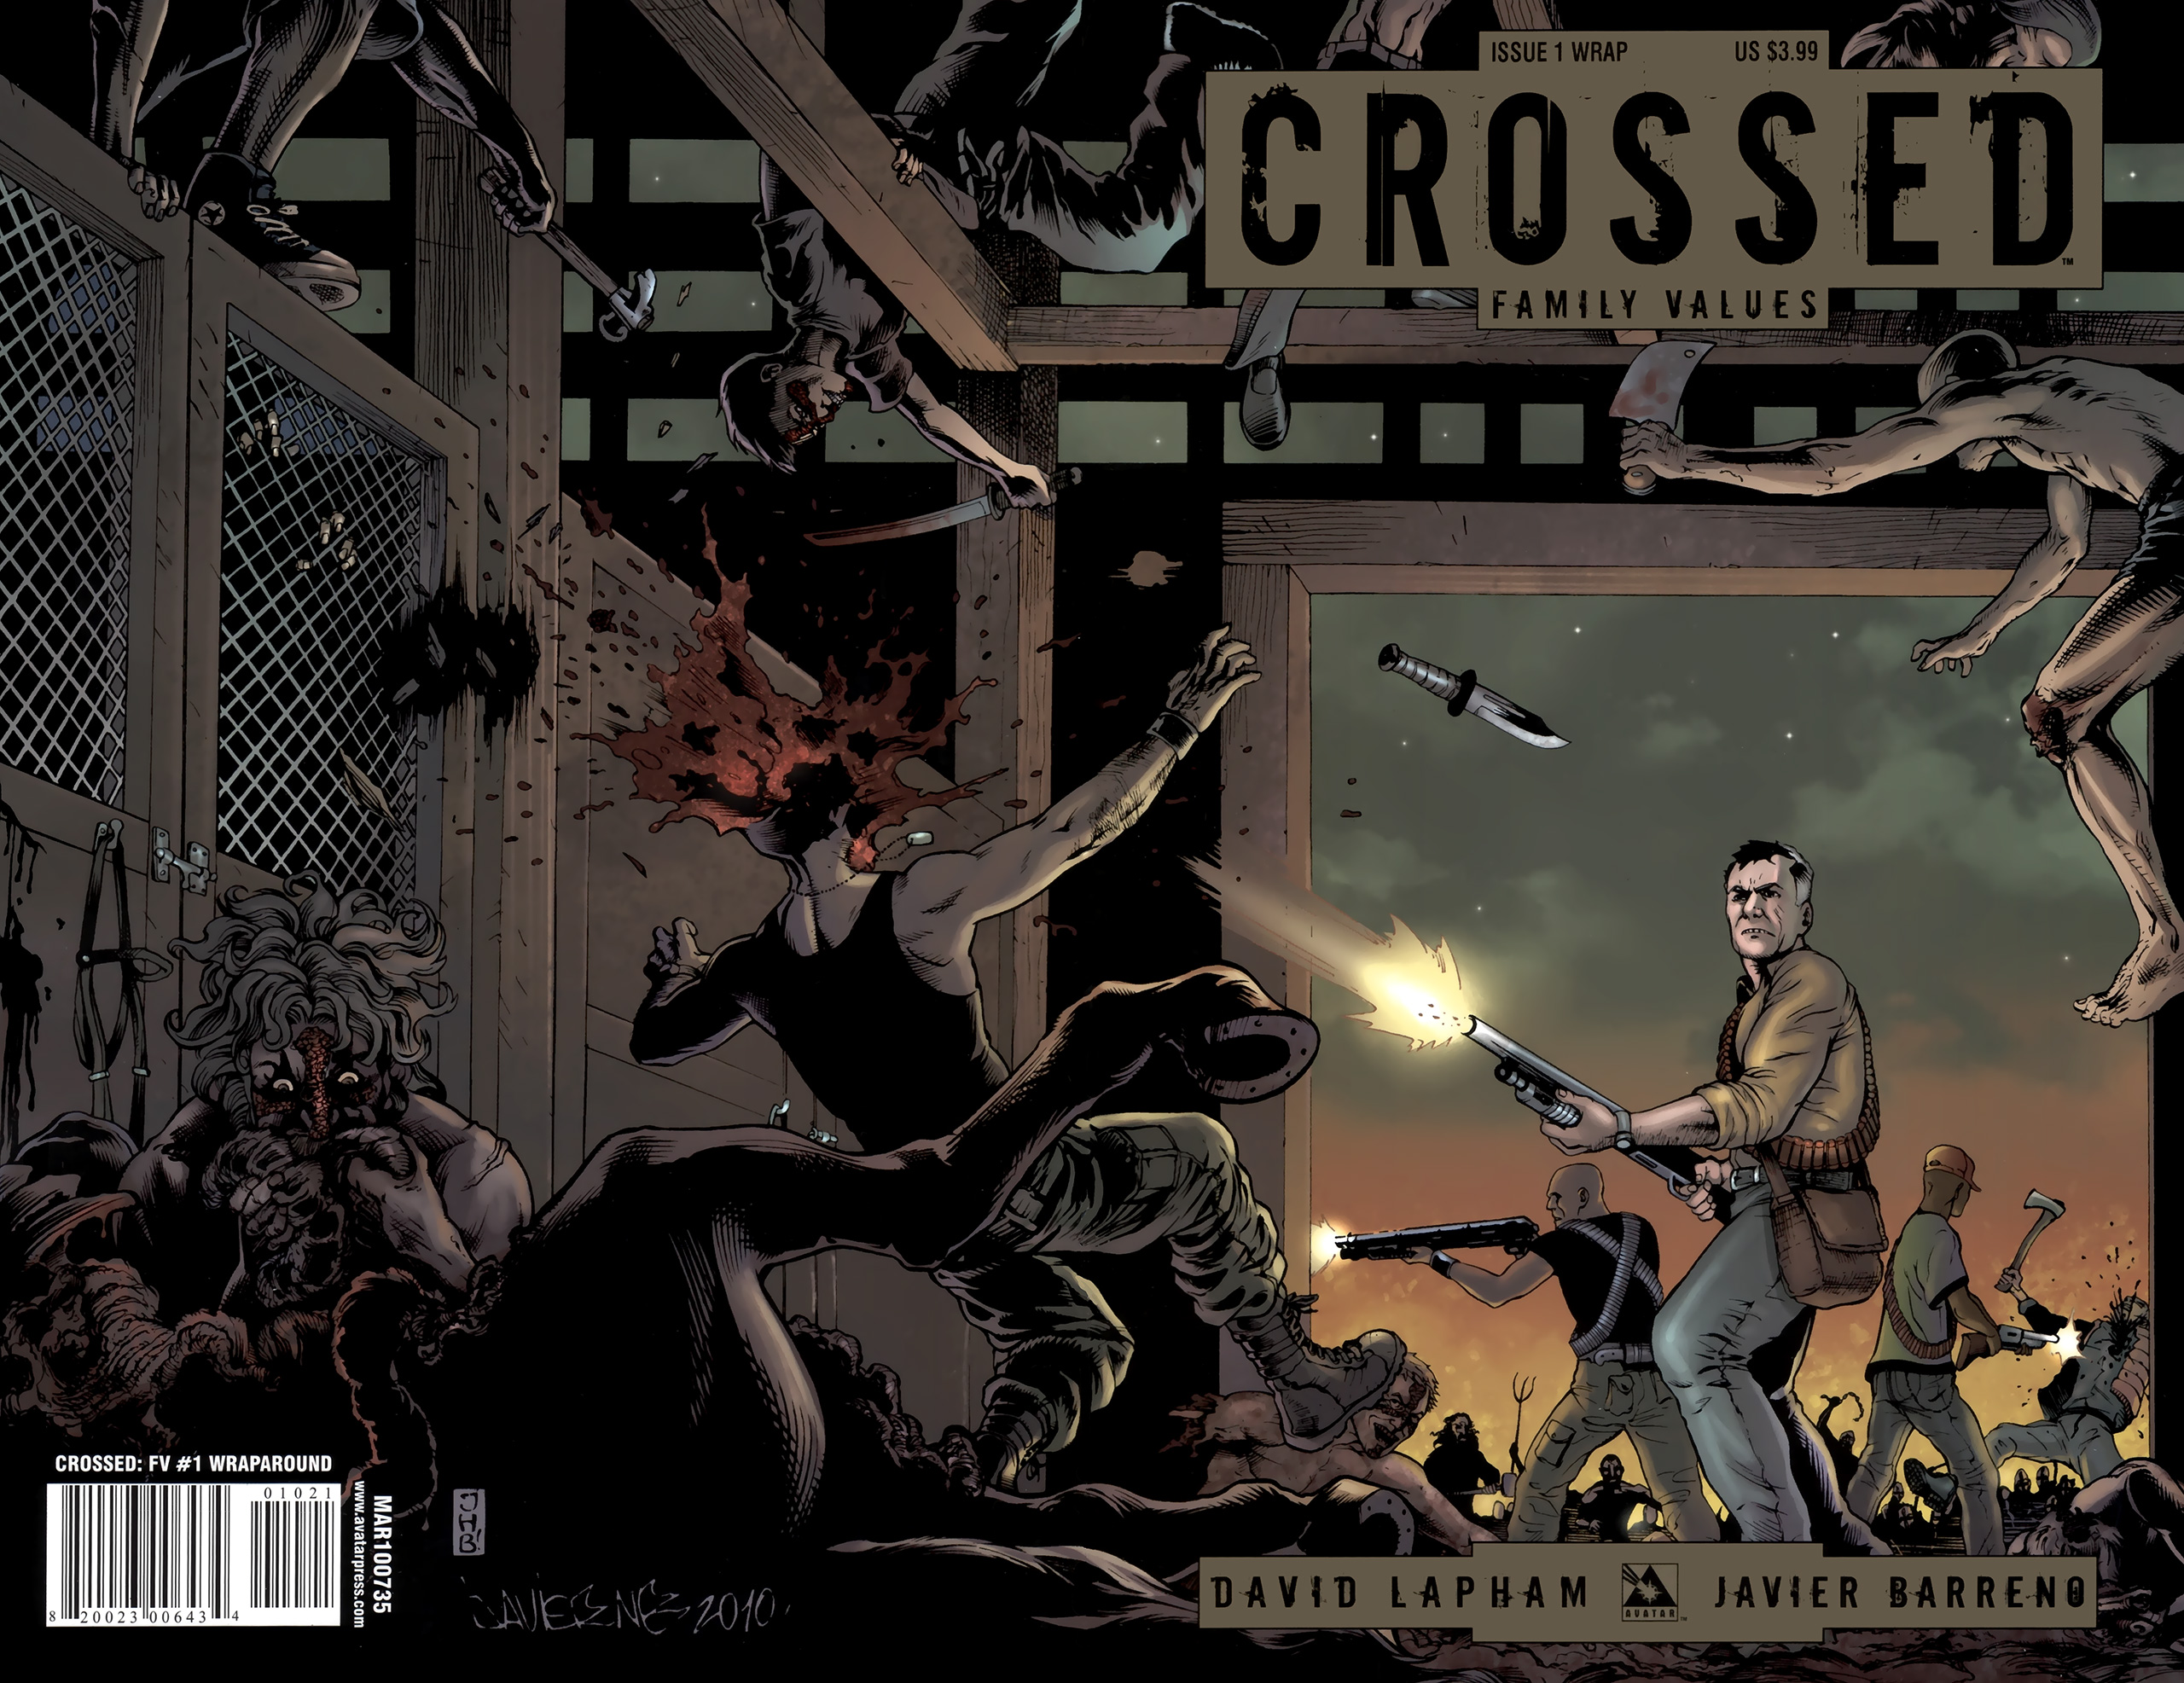 Crossed Family Values - Issue 1 of 7